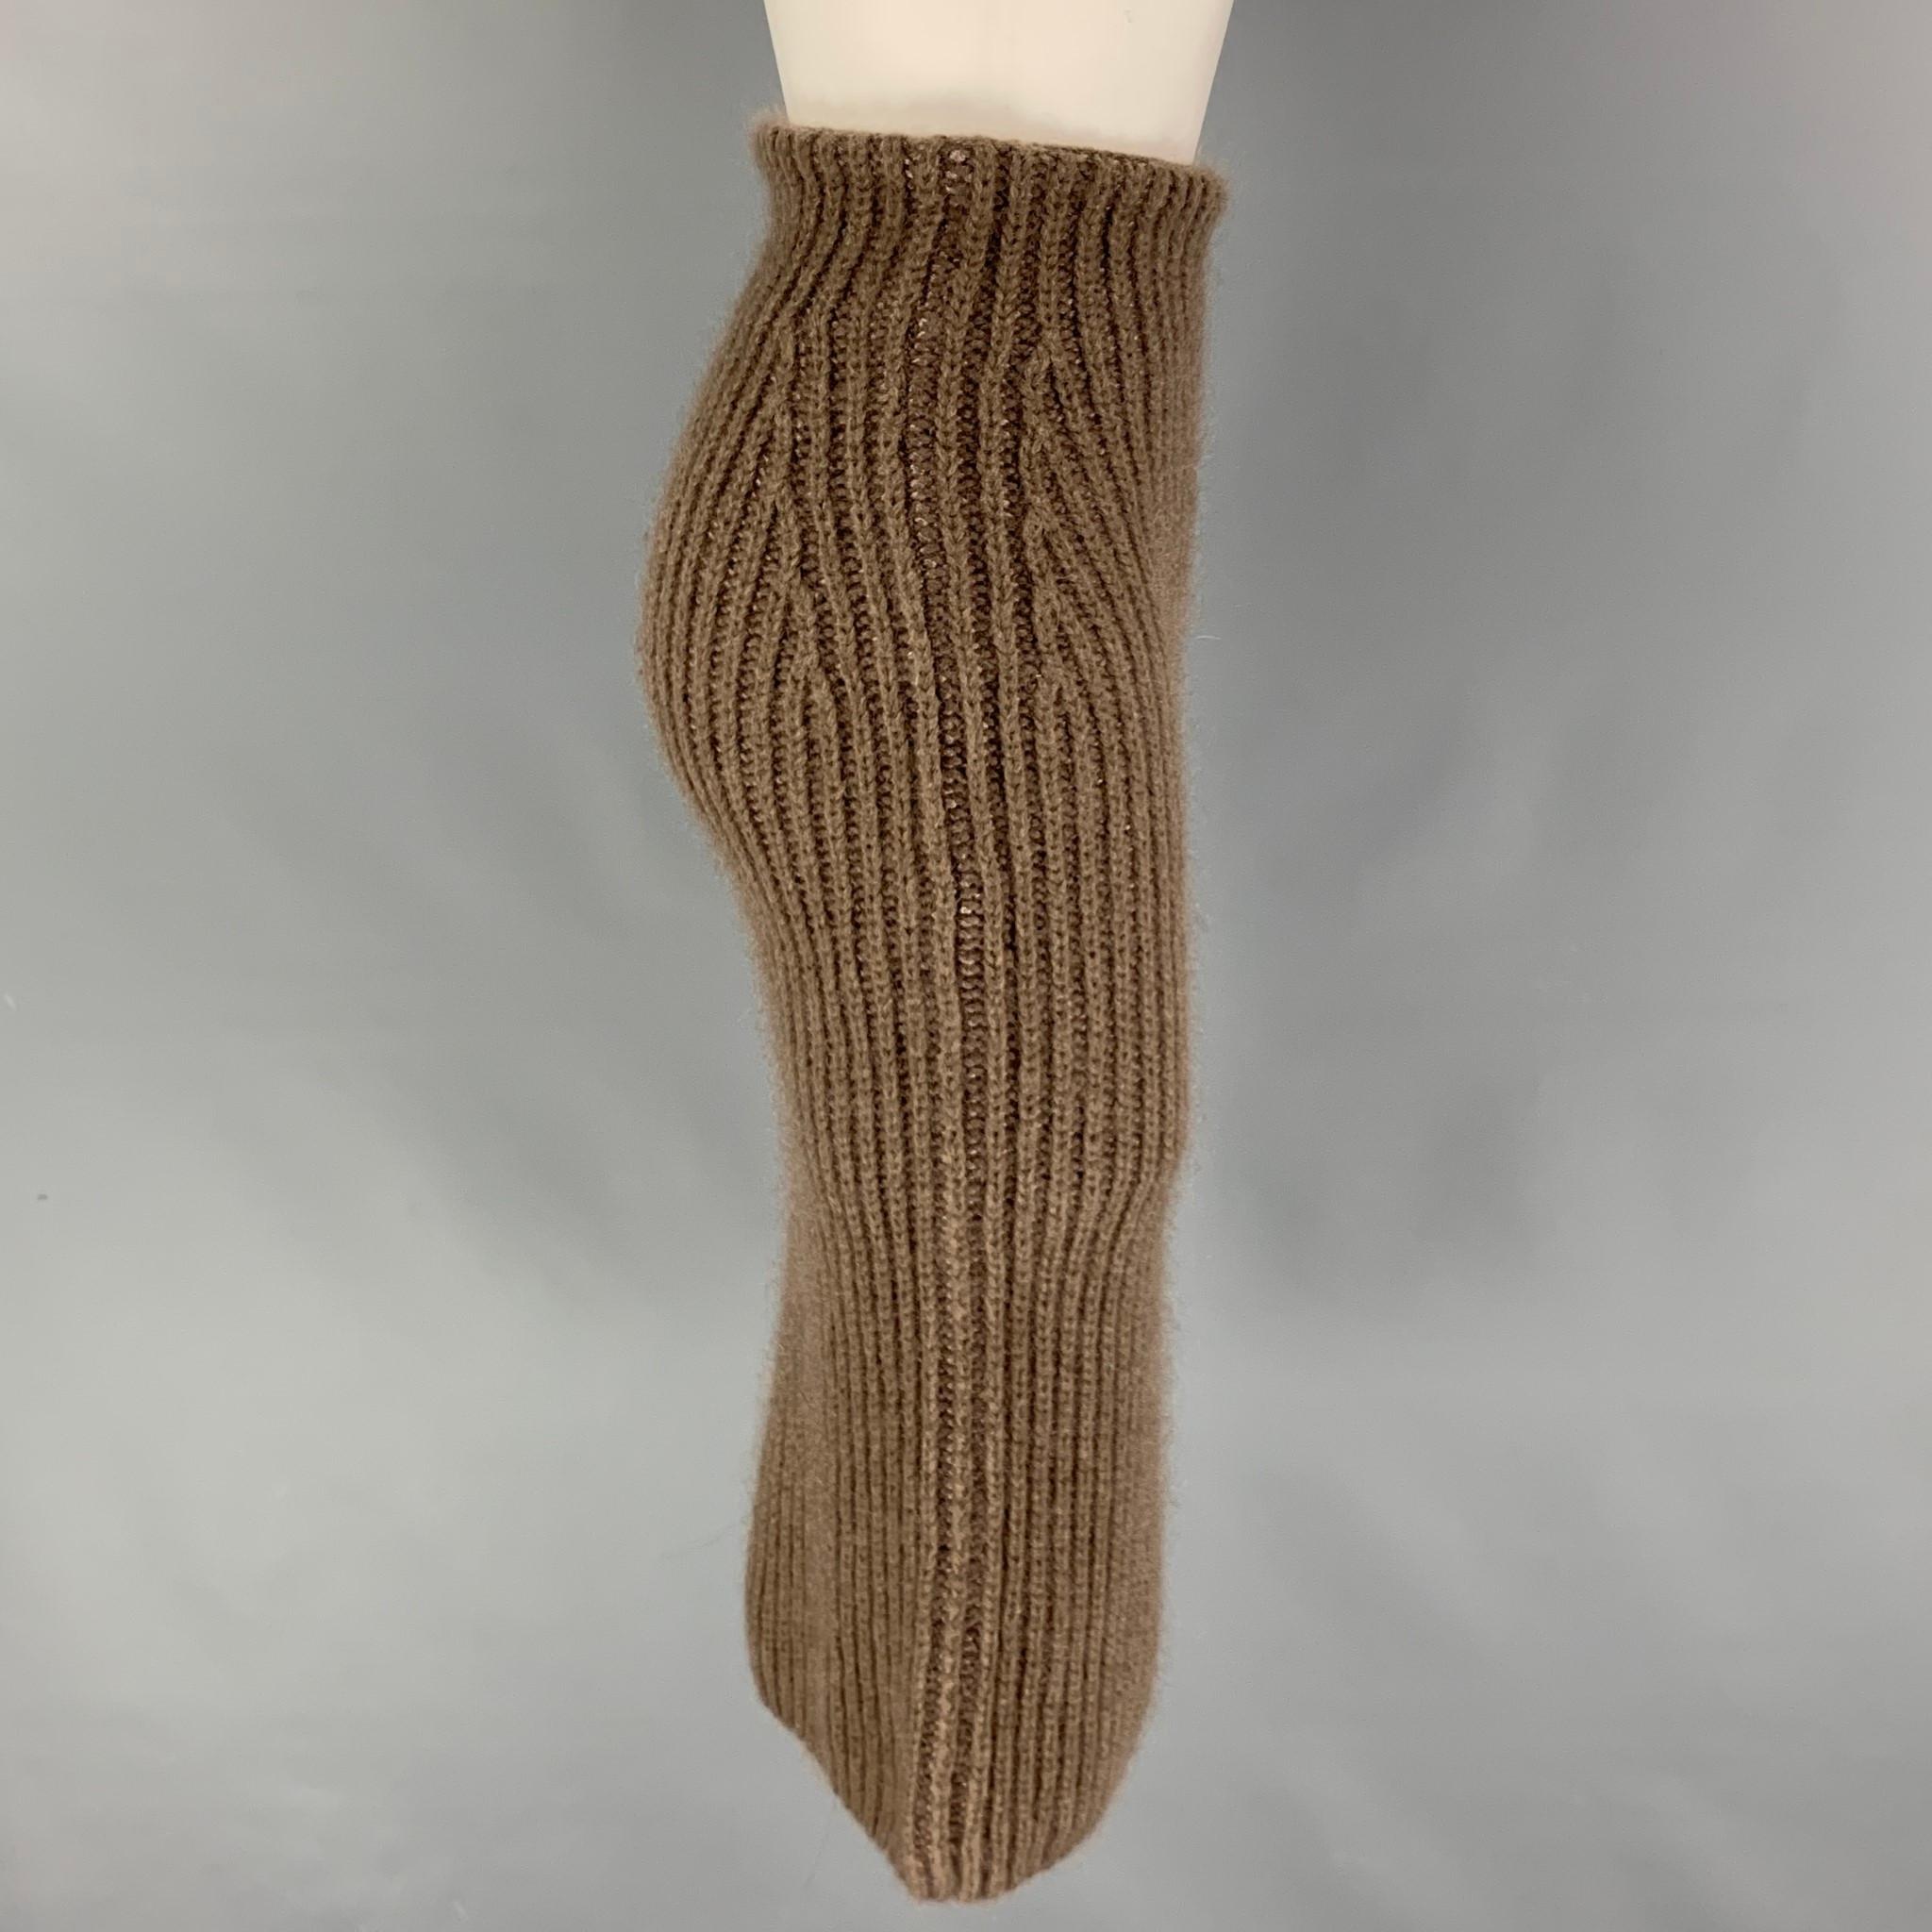 FENDI skirt comes in a taupe fishermen rib knit mohair / silk featuring a pencil style and a side zipper closure. Matching top sold separately. Made in Italy. 

Excellent Pre-Owned Condition.
Marked: 36
Original Retail Price: